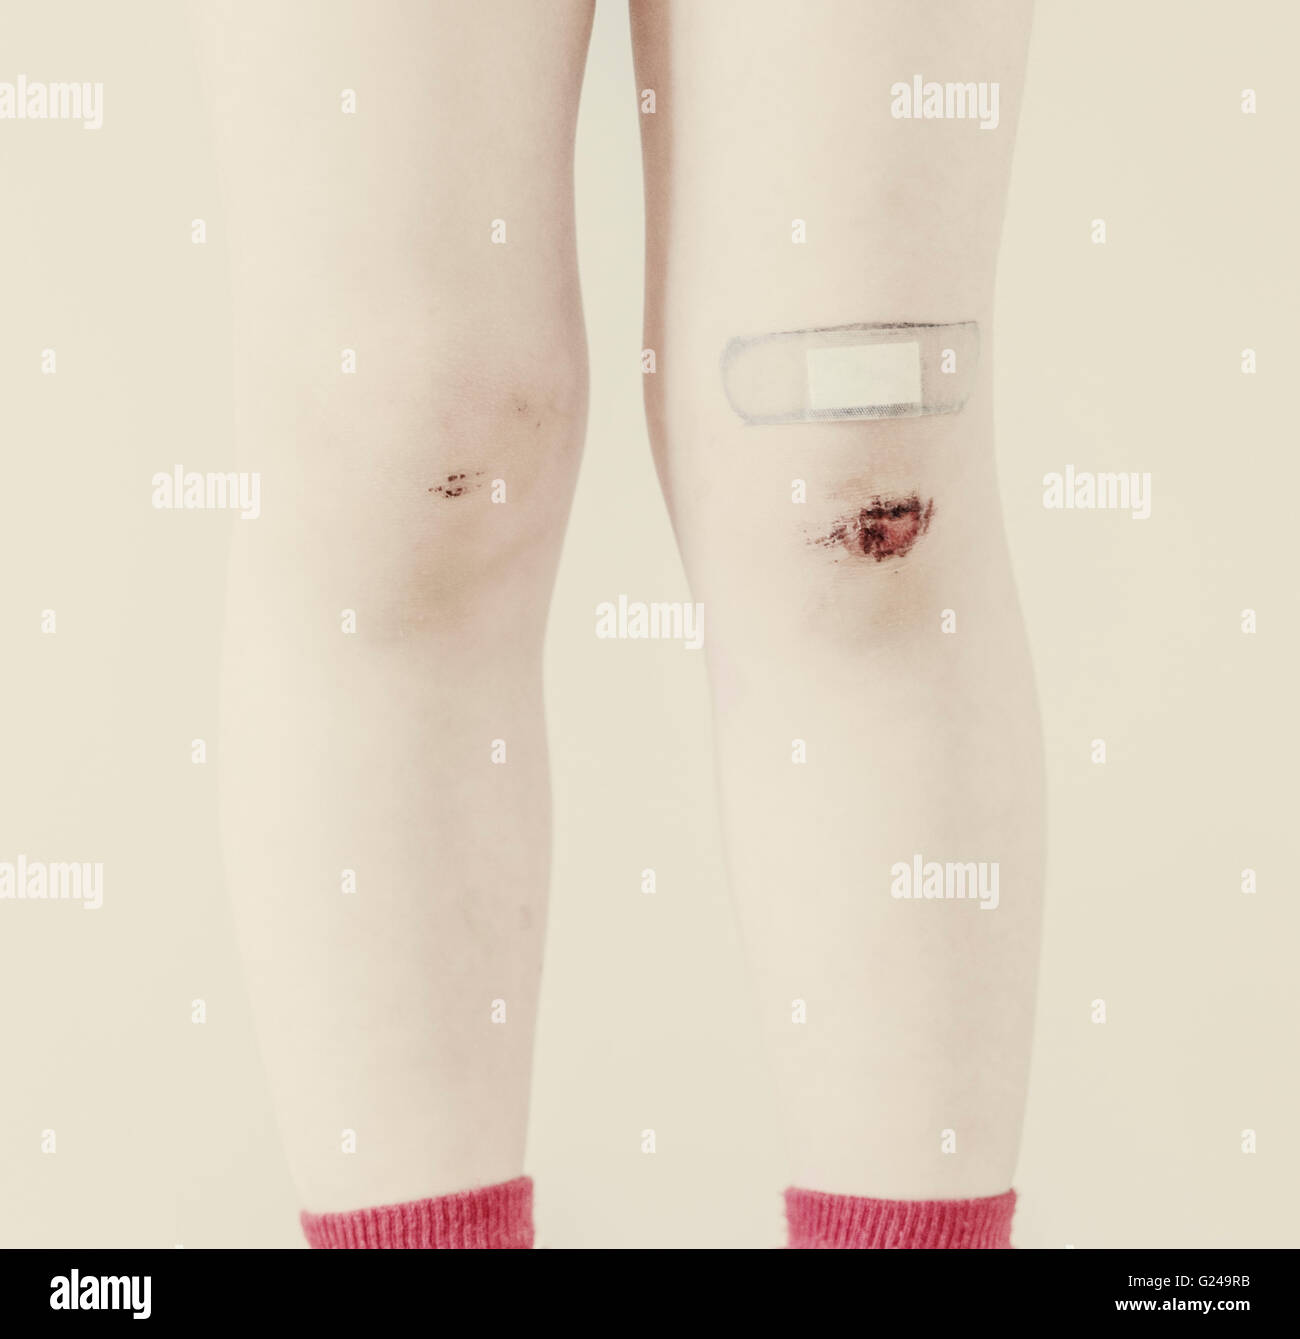 Child's legs with bruises and band-aid Stock Photo